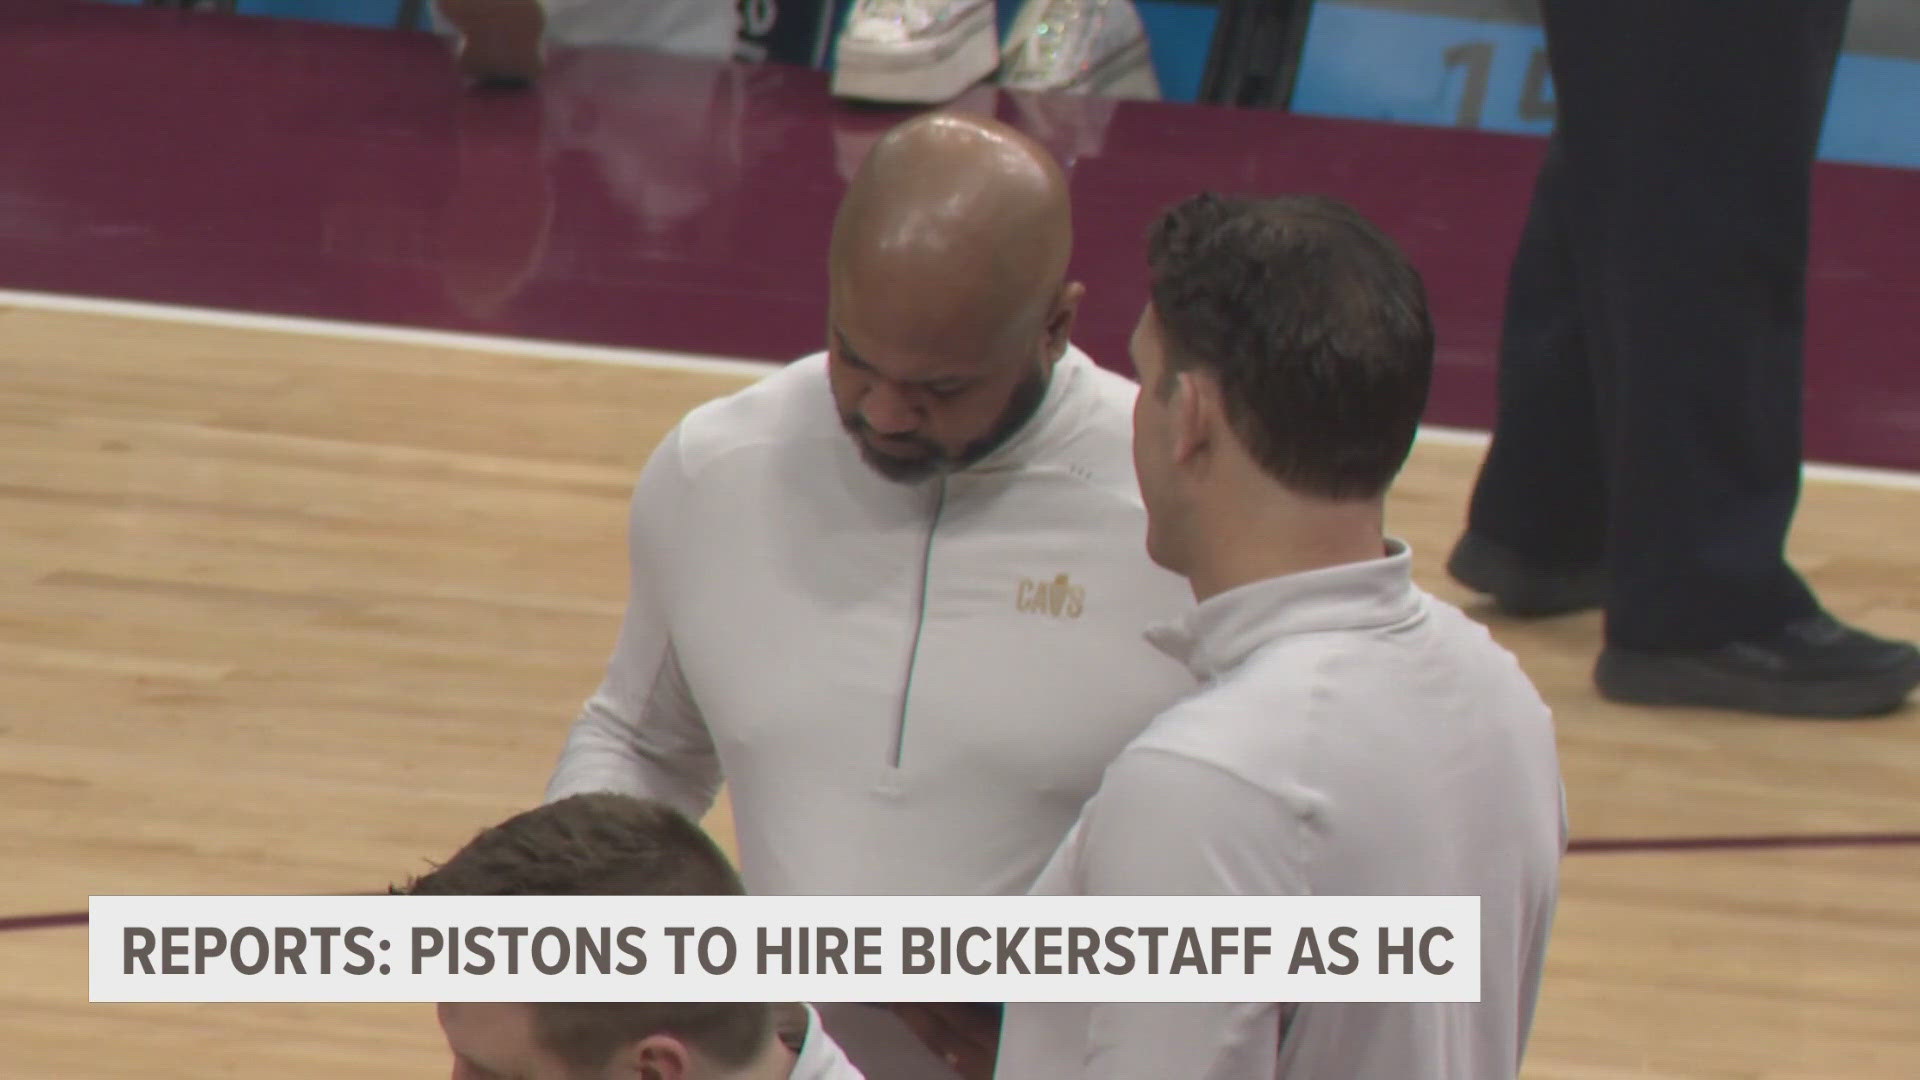 Reports say Bickerstaff agreed to a five-year deal with the Pistons.